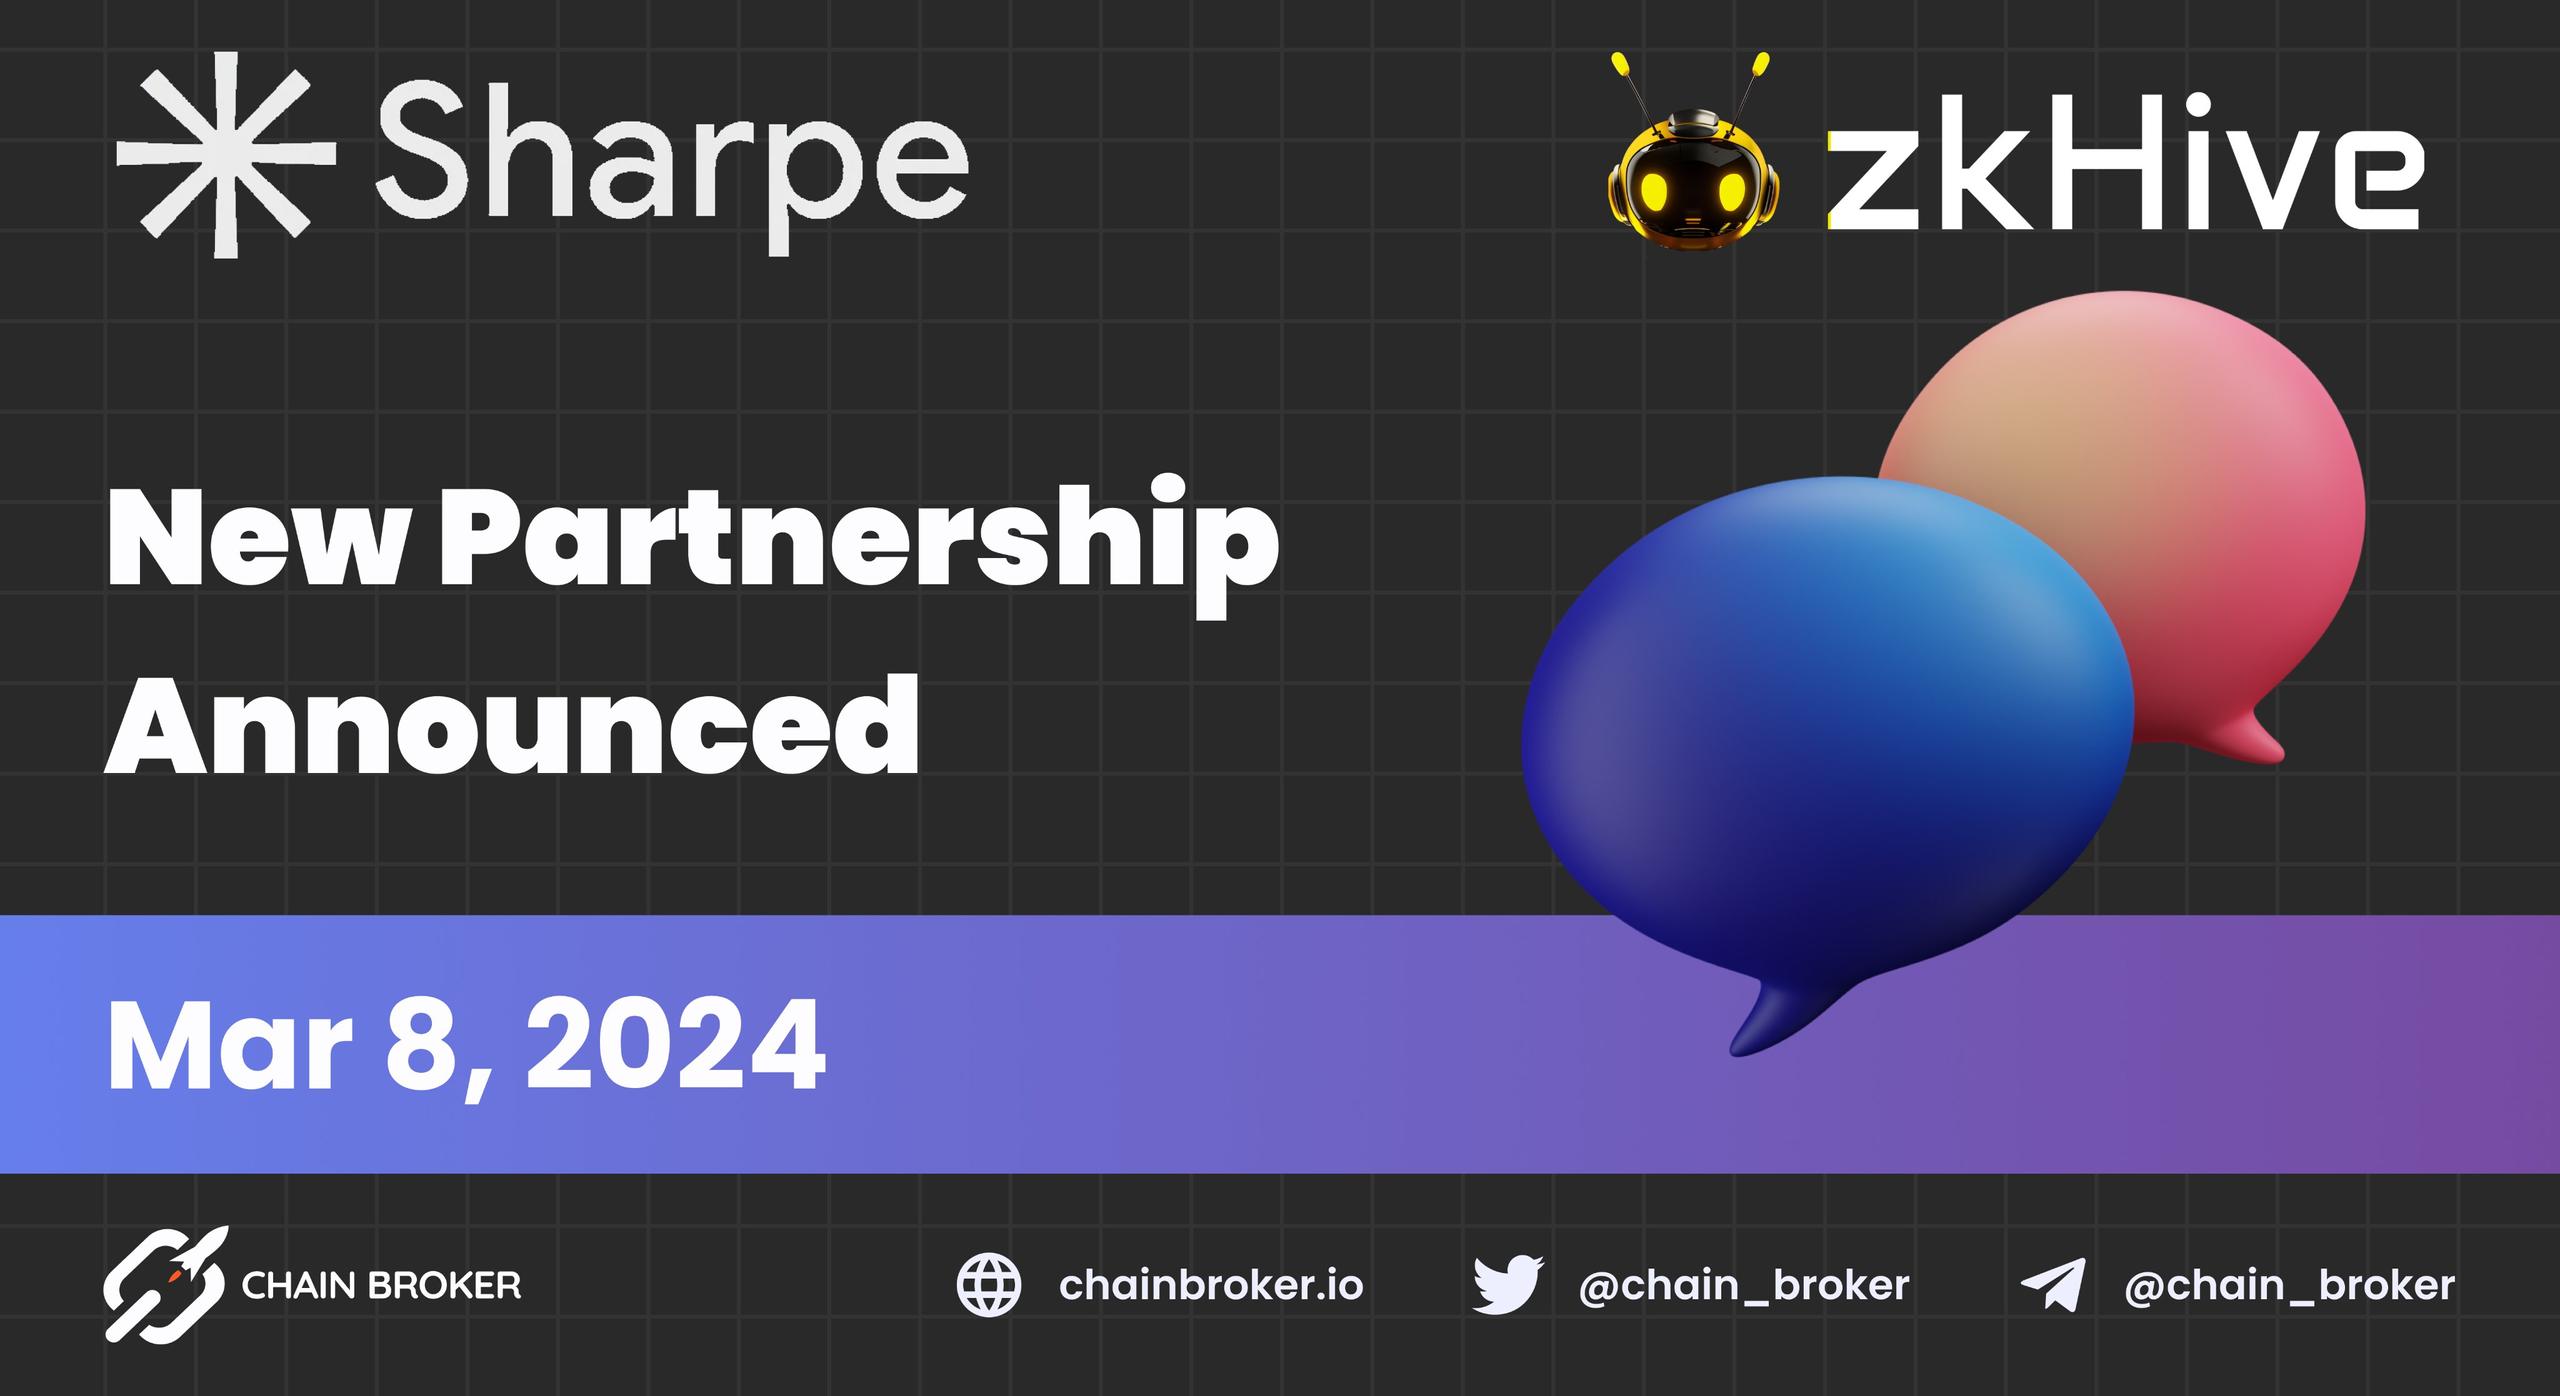 Sharpe AI and zkHive announce Partnership